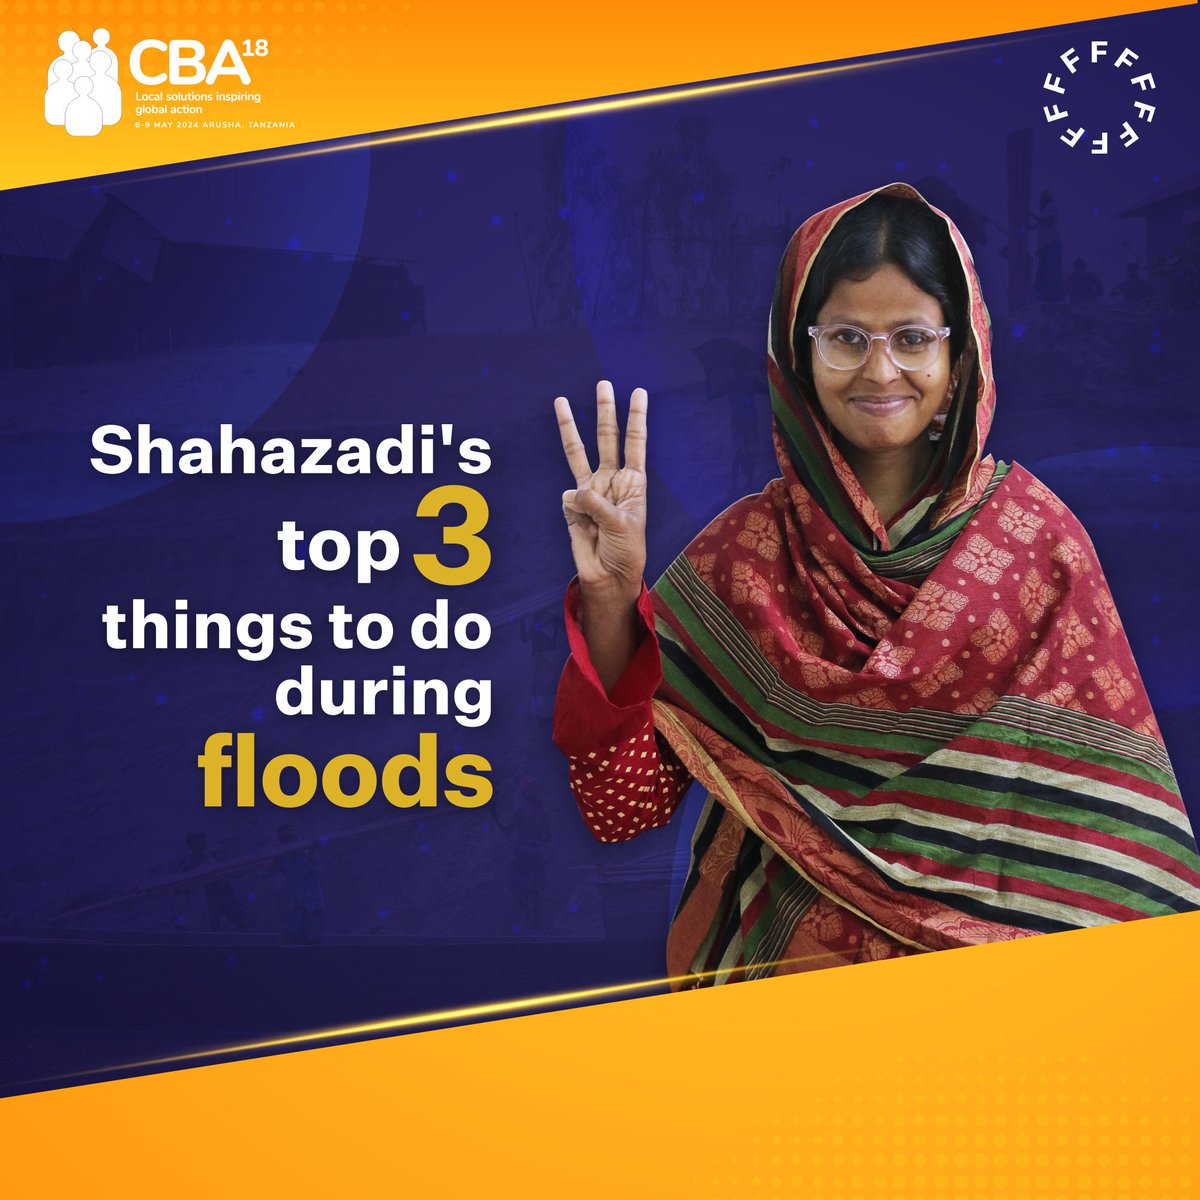 Shahazadi’s Flood Survival Guide 1. Transport - Boats to be prepared 2. Essentials - Important documents to be put into plastic bags along with dry food & torch light 3. Safety - persons with disabilities, infant &pregnant women to be moved to safety #SDG11 #SDG13 #SavingLives